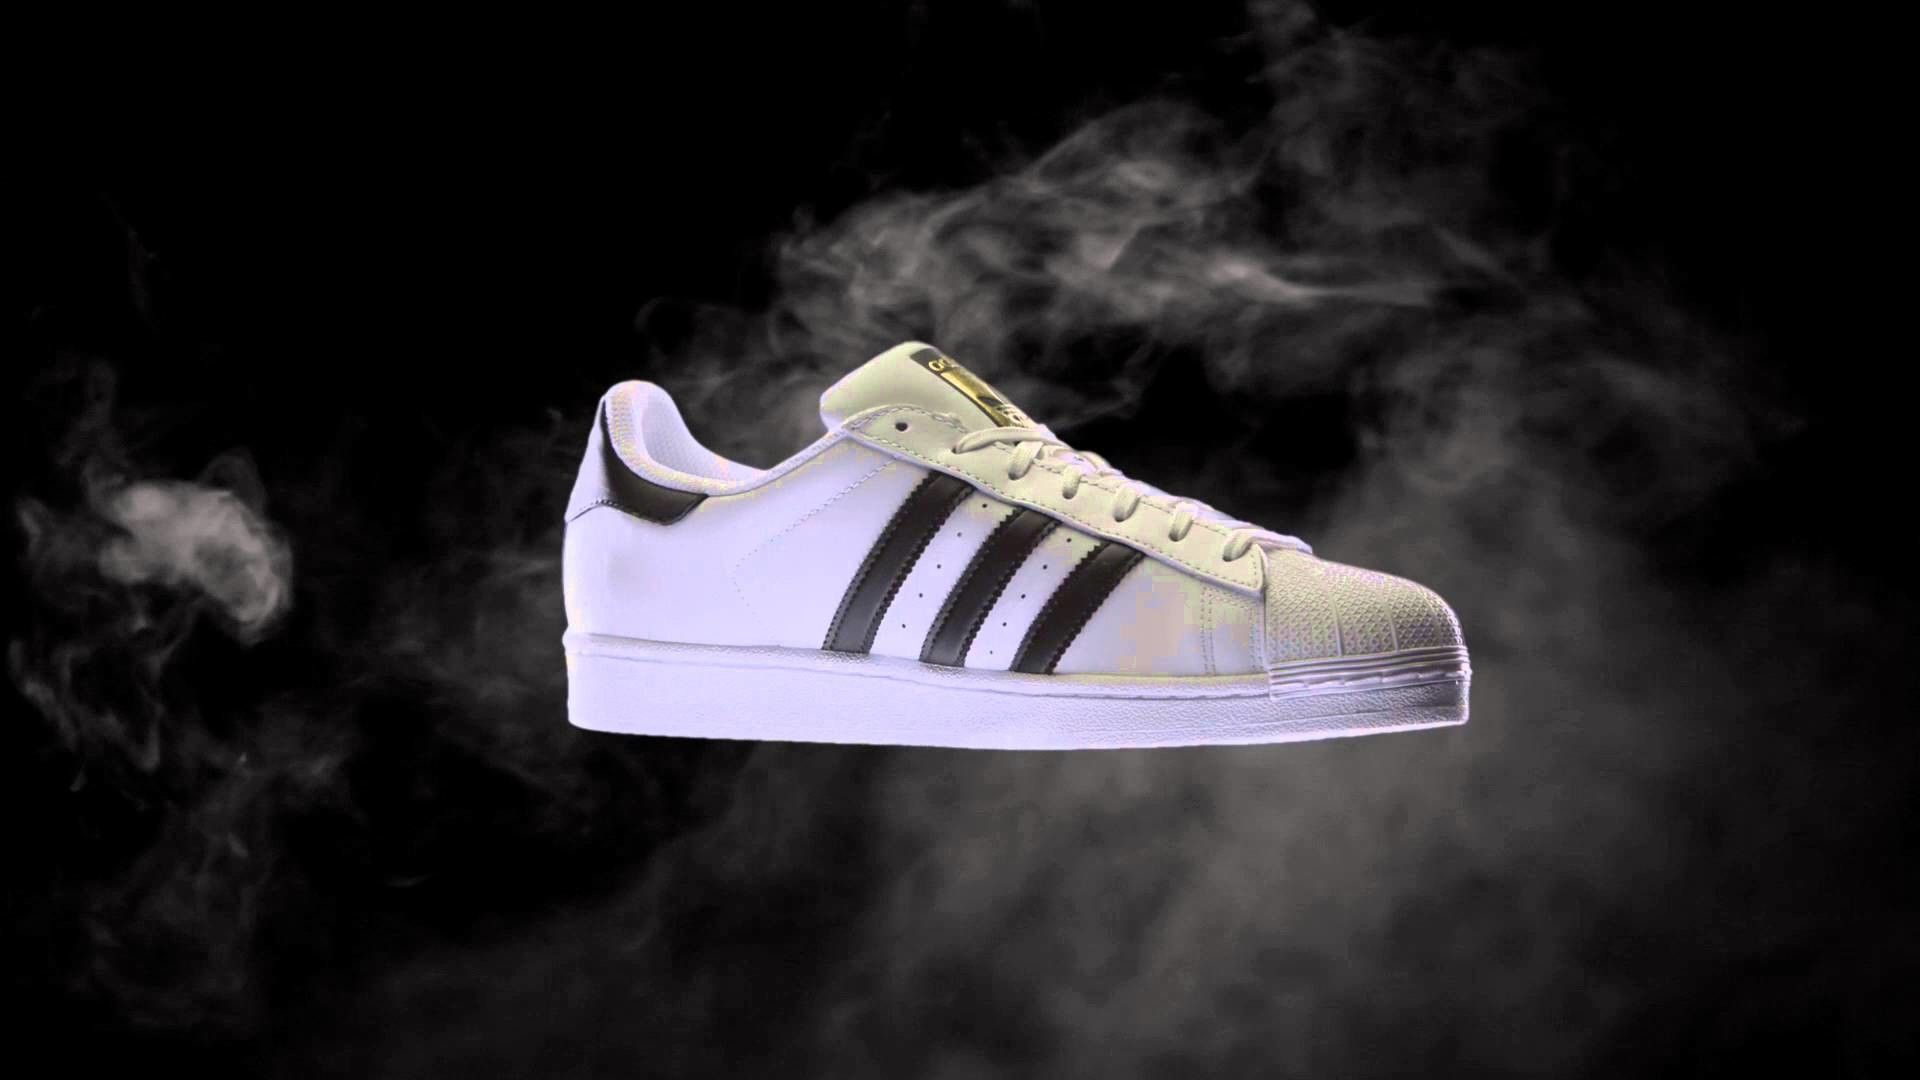 Adidas Shoes Wallpaper Free Adidas Shoes Background